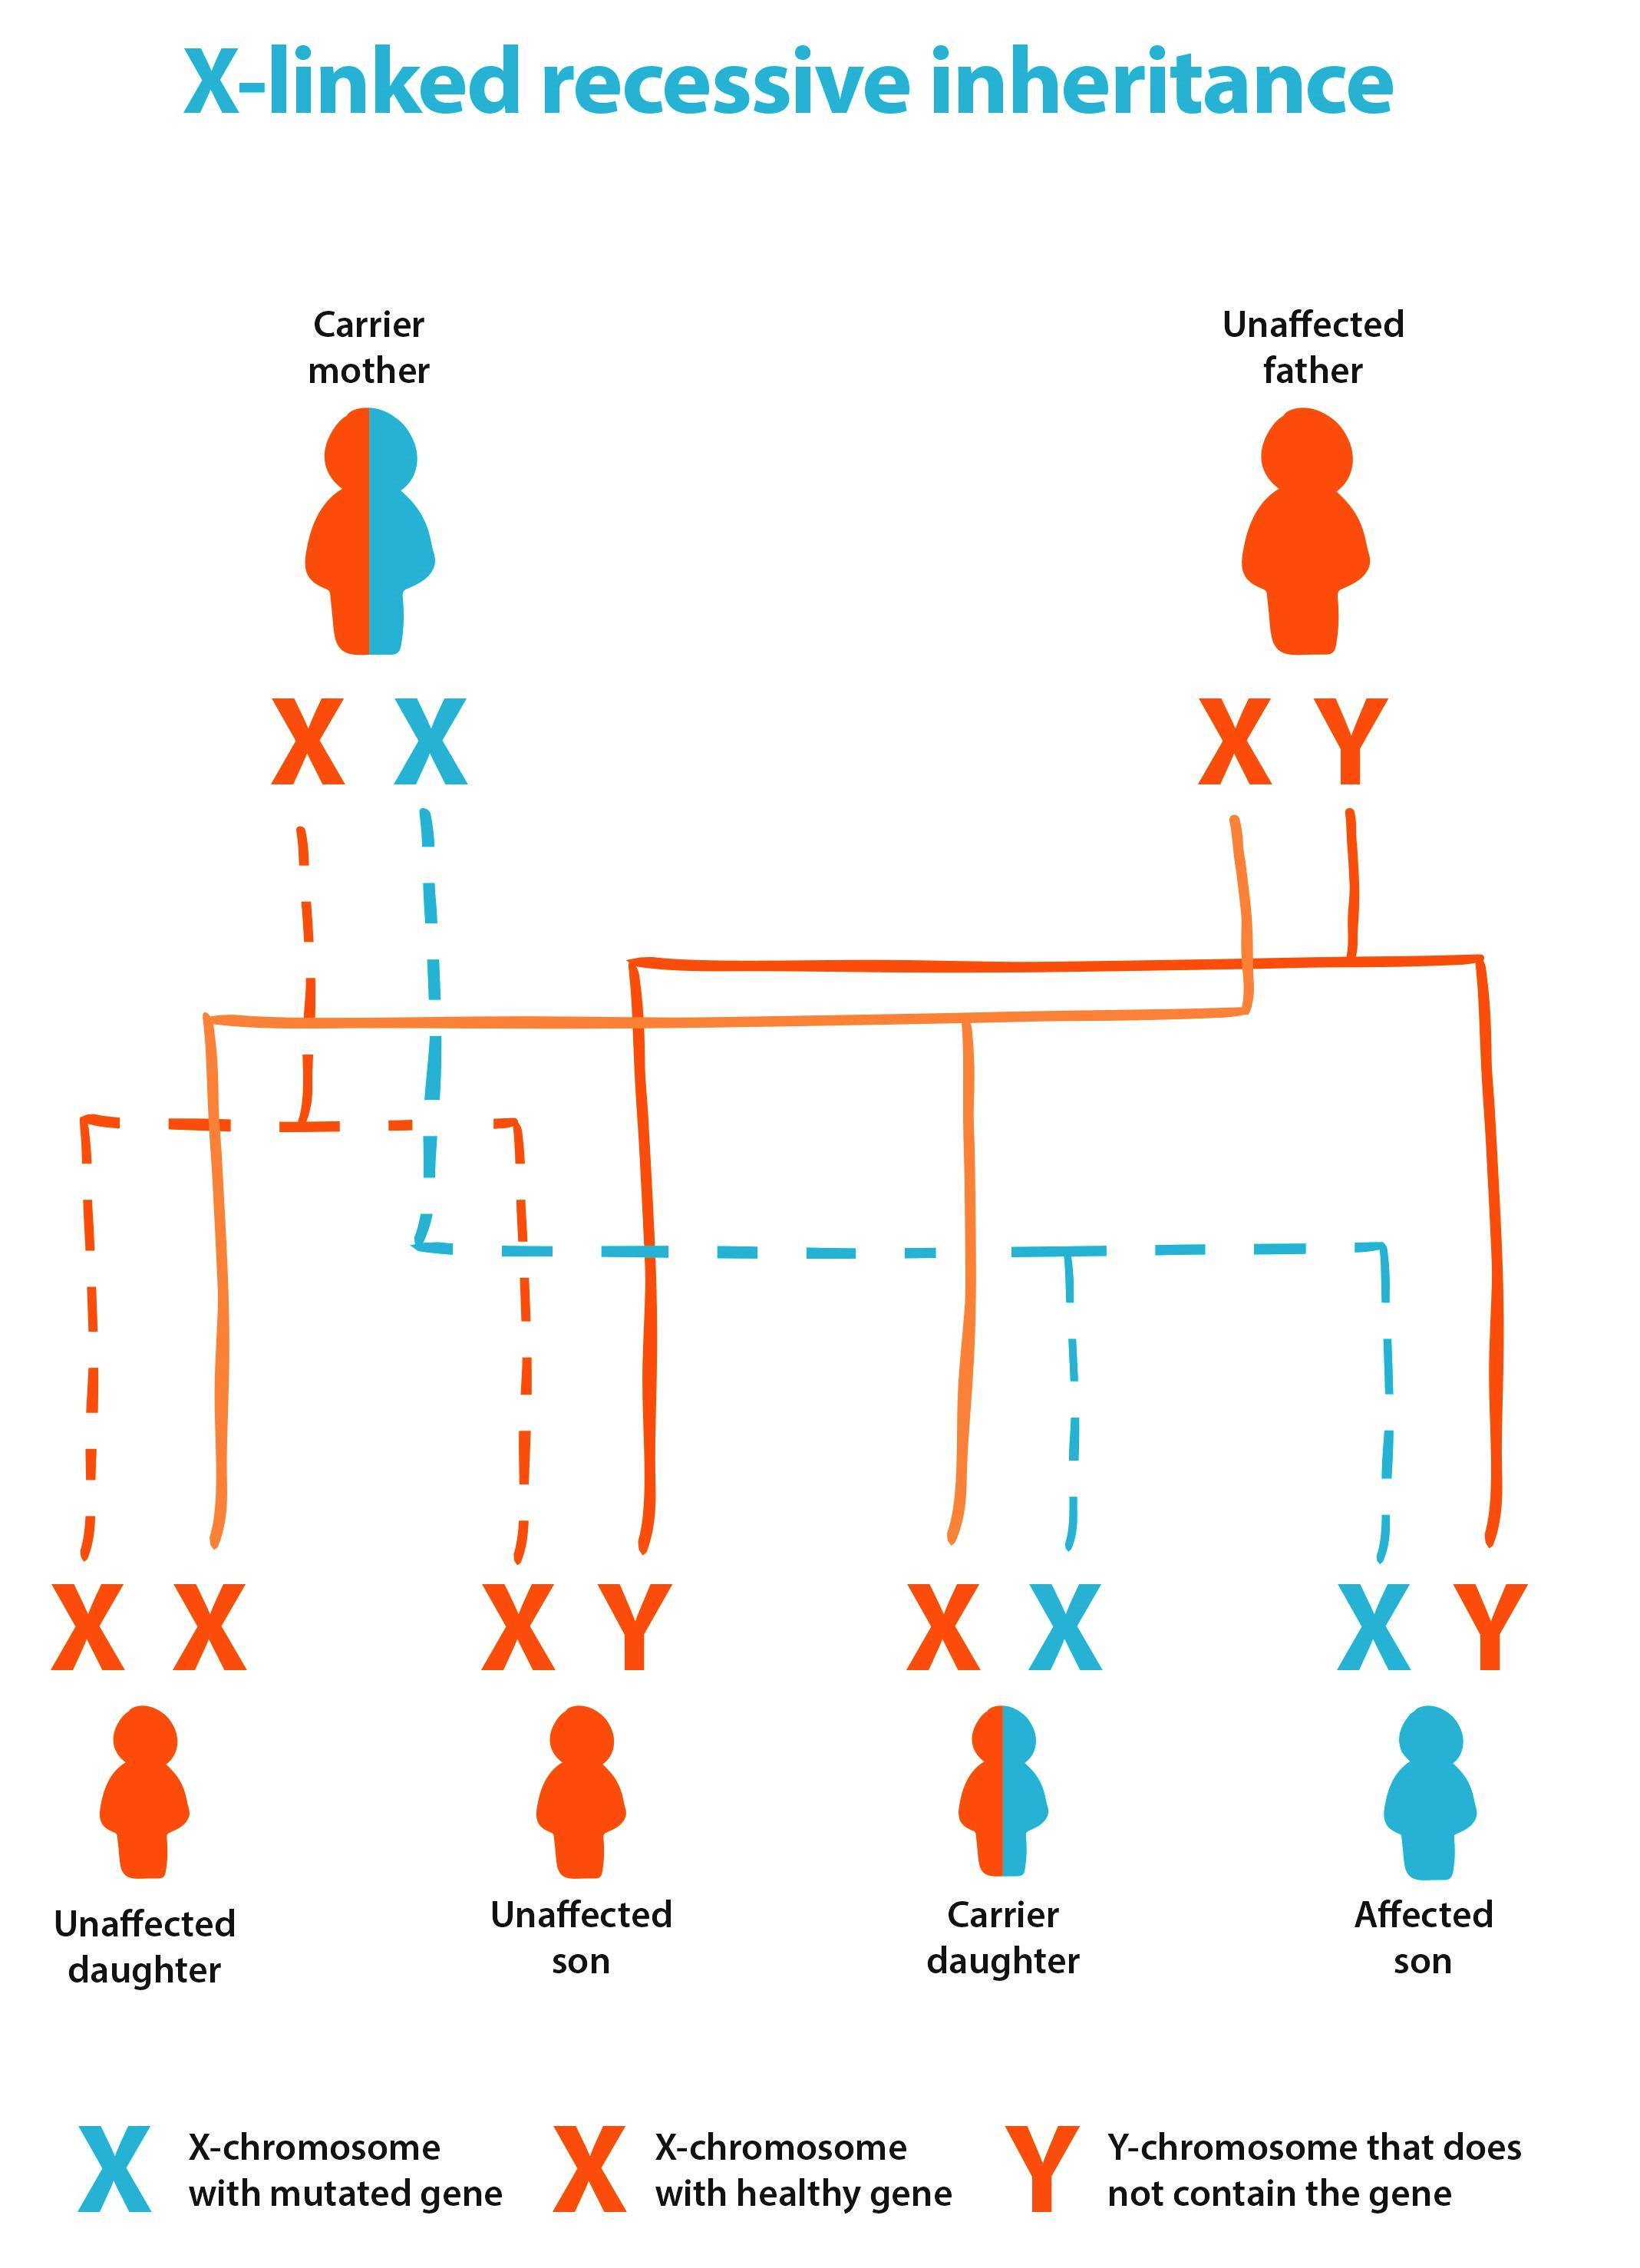 This diagram shows what would be a likely outcome if a carrier mother of an X-linked recessive condition had children with an unaffected father. They have 4 offspring, 1 unaffected daughter, 1 unaffected son. They also have a carrier daughter and an affected son.